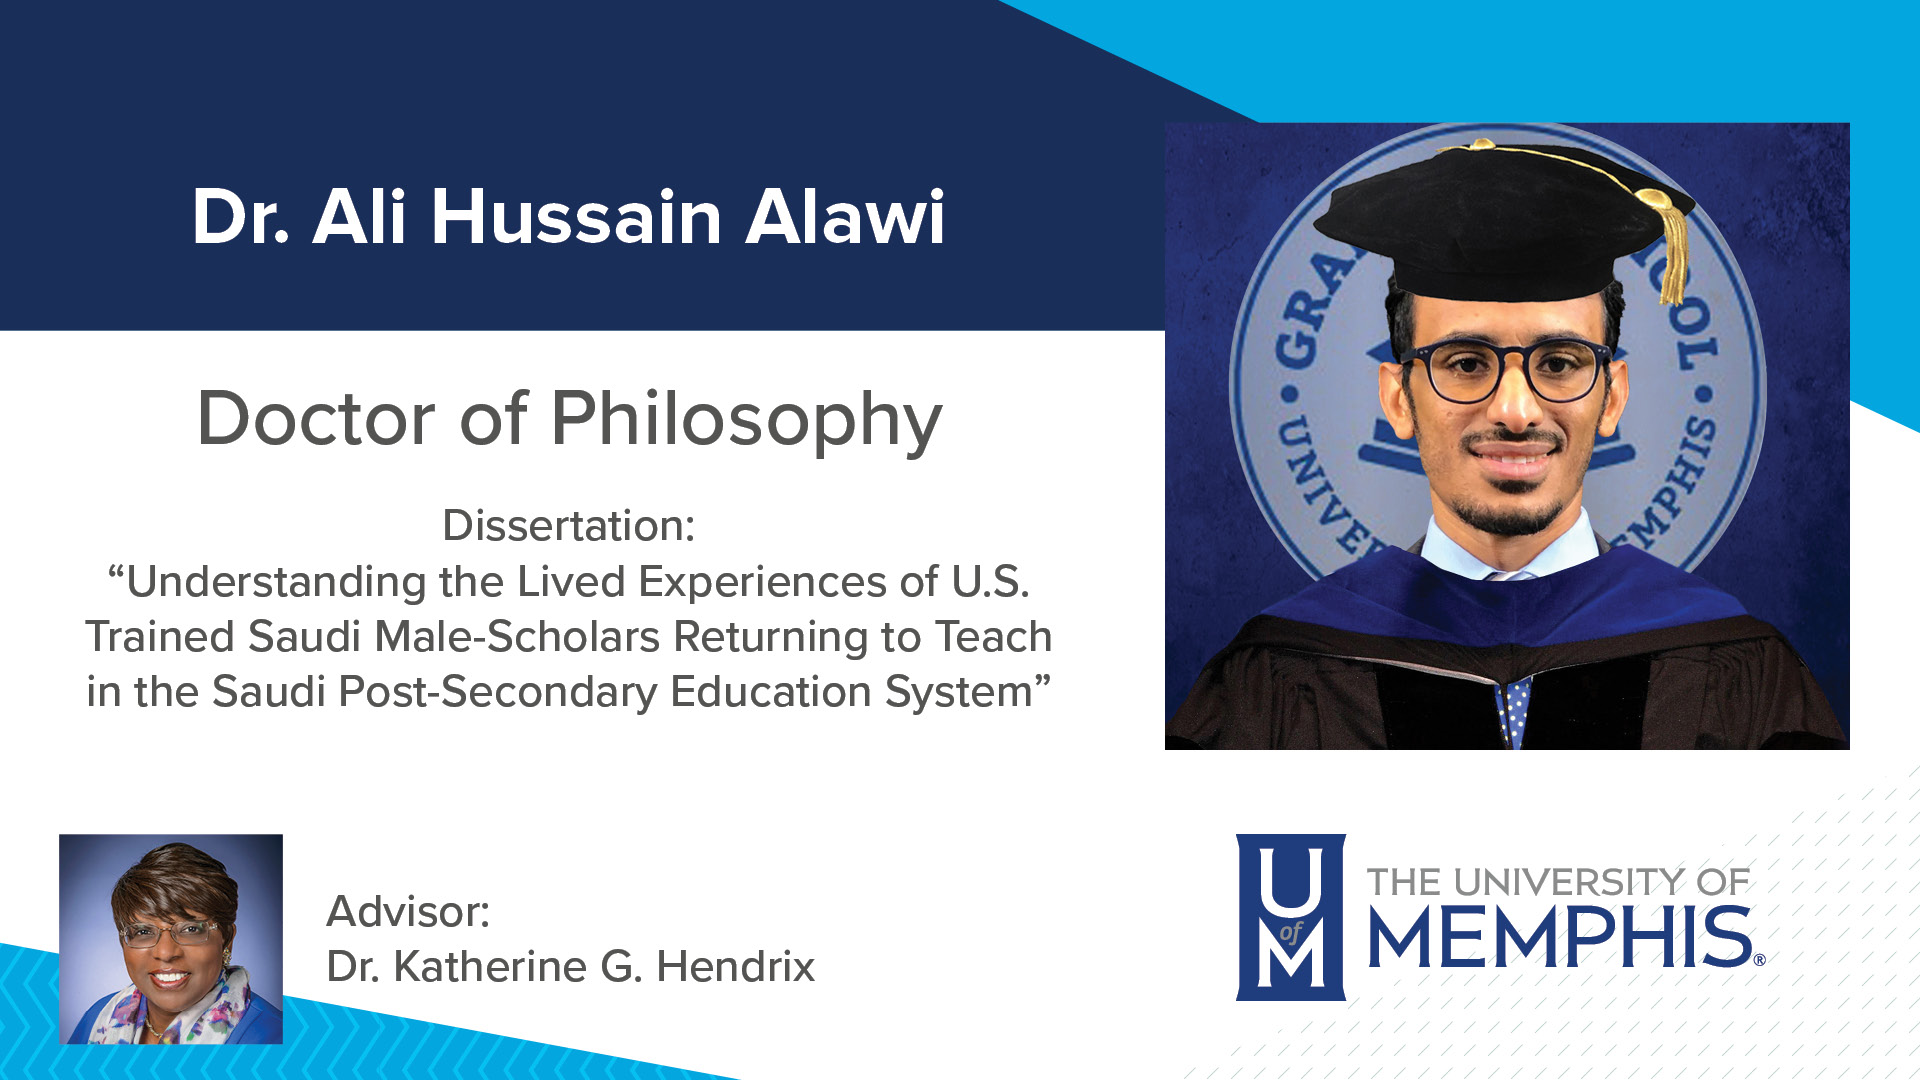 Dr. Ali Hussain Alawi Dissertation: “Understanding the Lived Experiences of U.S. Trained Saudi Male-Scholars Returning to Teach in the Saudi Post-Secondary Education System” Major Professor: Dr. Katherine G. Hendrix